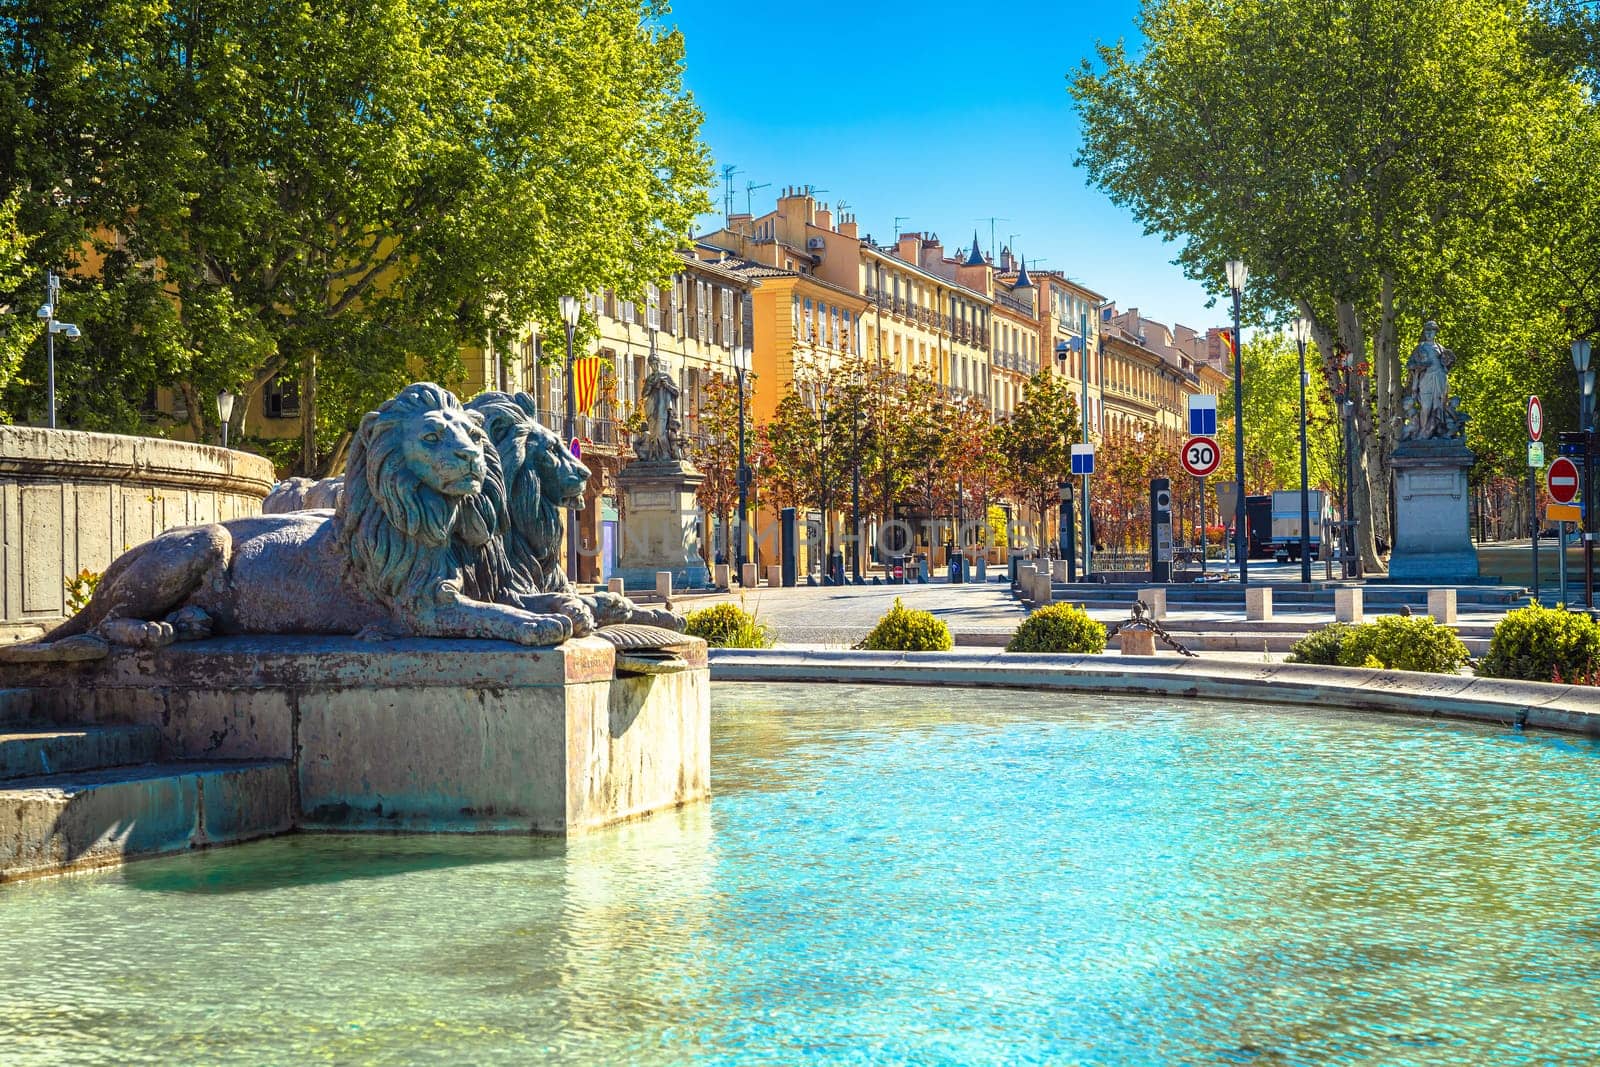 Aix en Provence fountain and cityscape view, Provance region of southern France